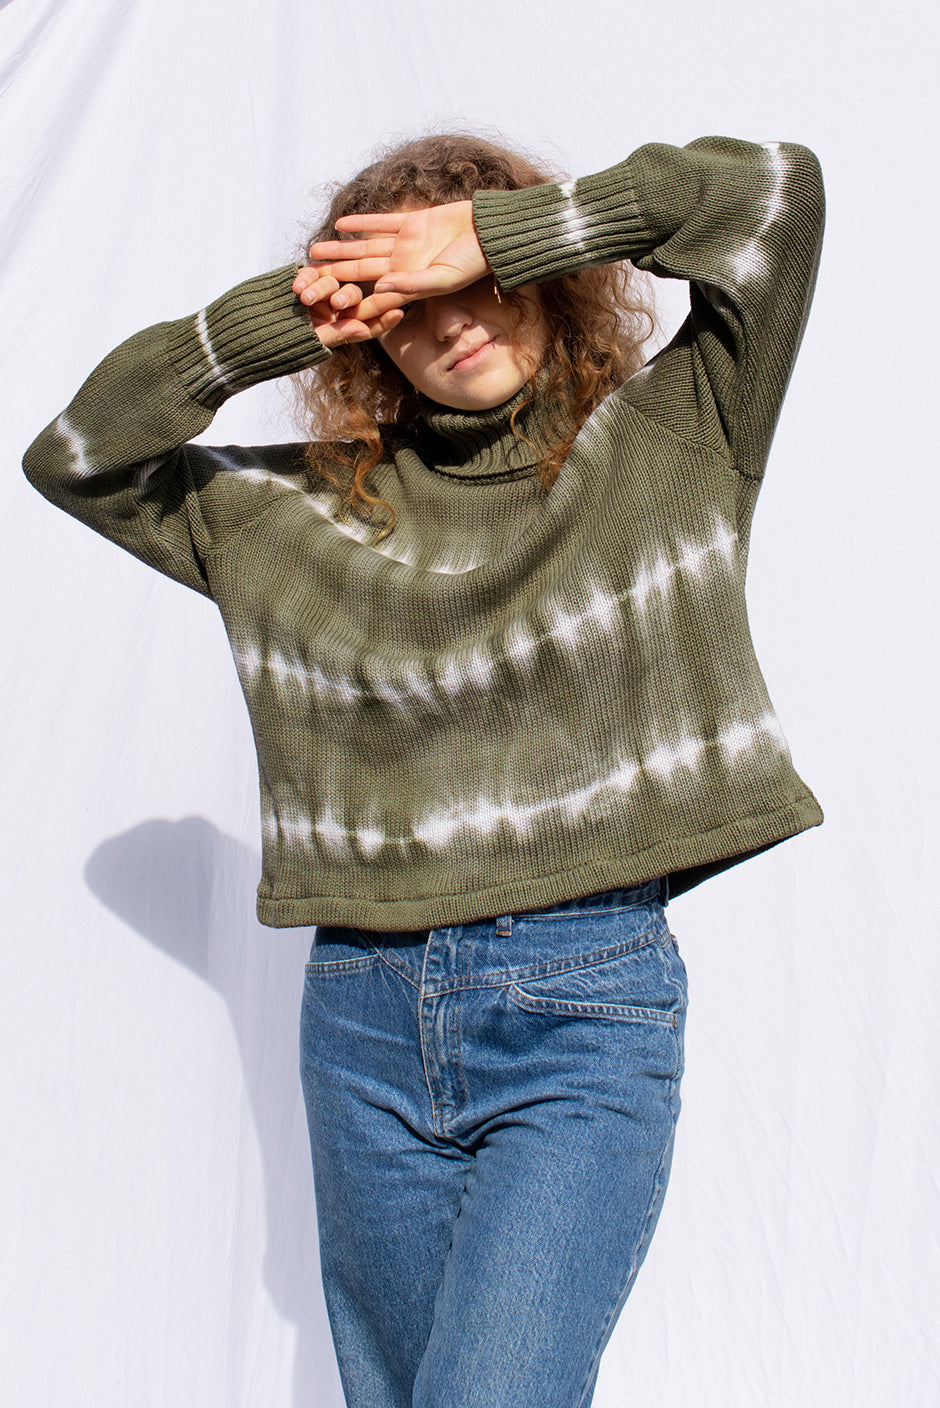 Cactus Revival turtleneck sweater for women by Paneros Clothing. Handmade Tie-Dye Upcycled from sustainable cotton. Front View.